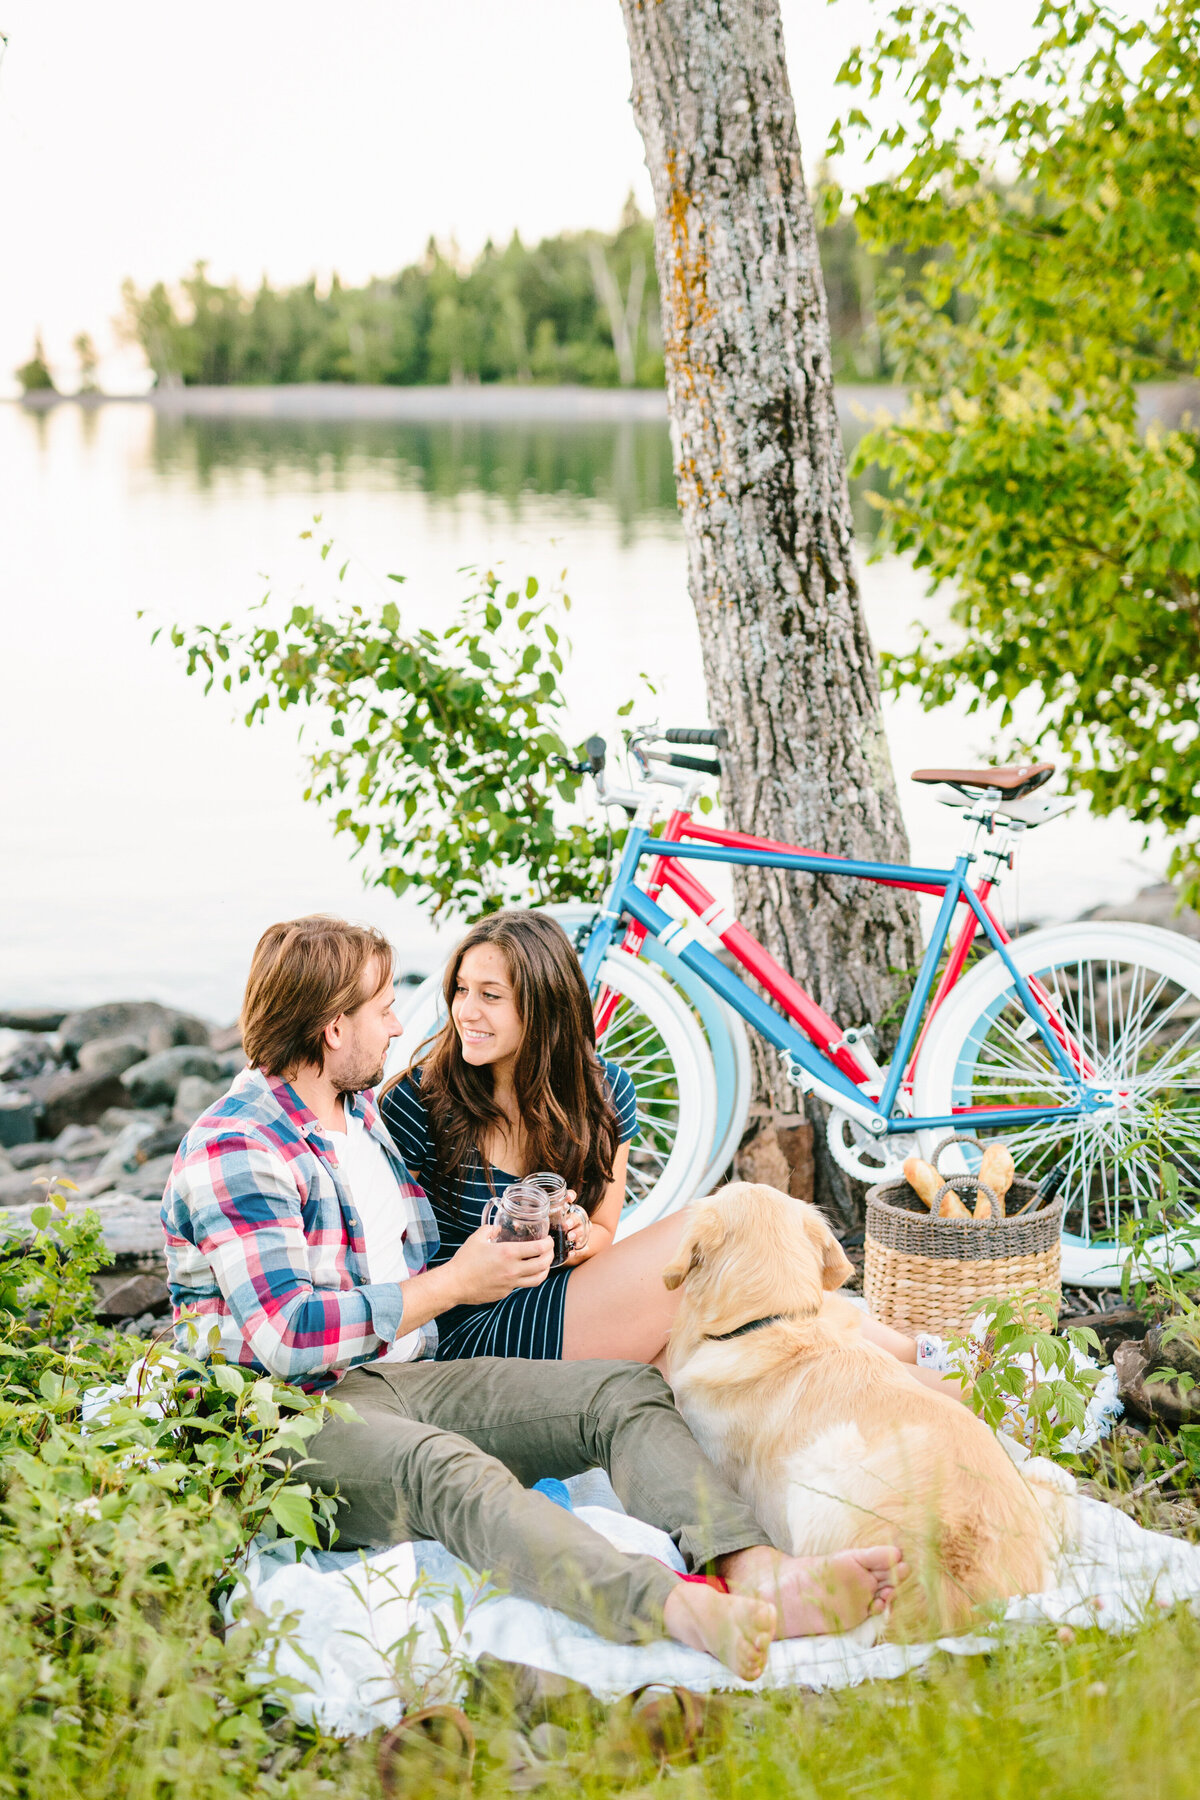 Best California and Texas Engagement Photographer-Jodee Debes Photography-228